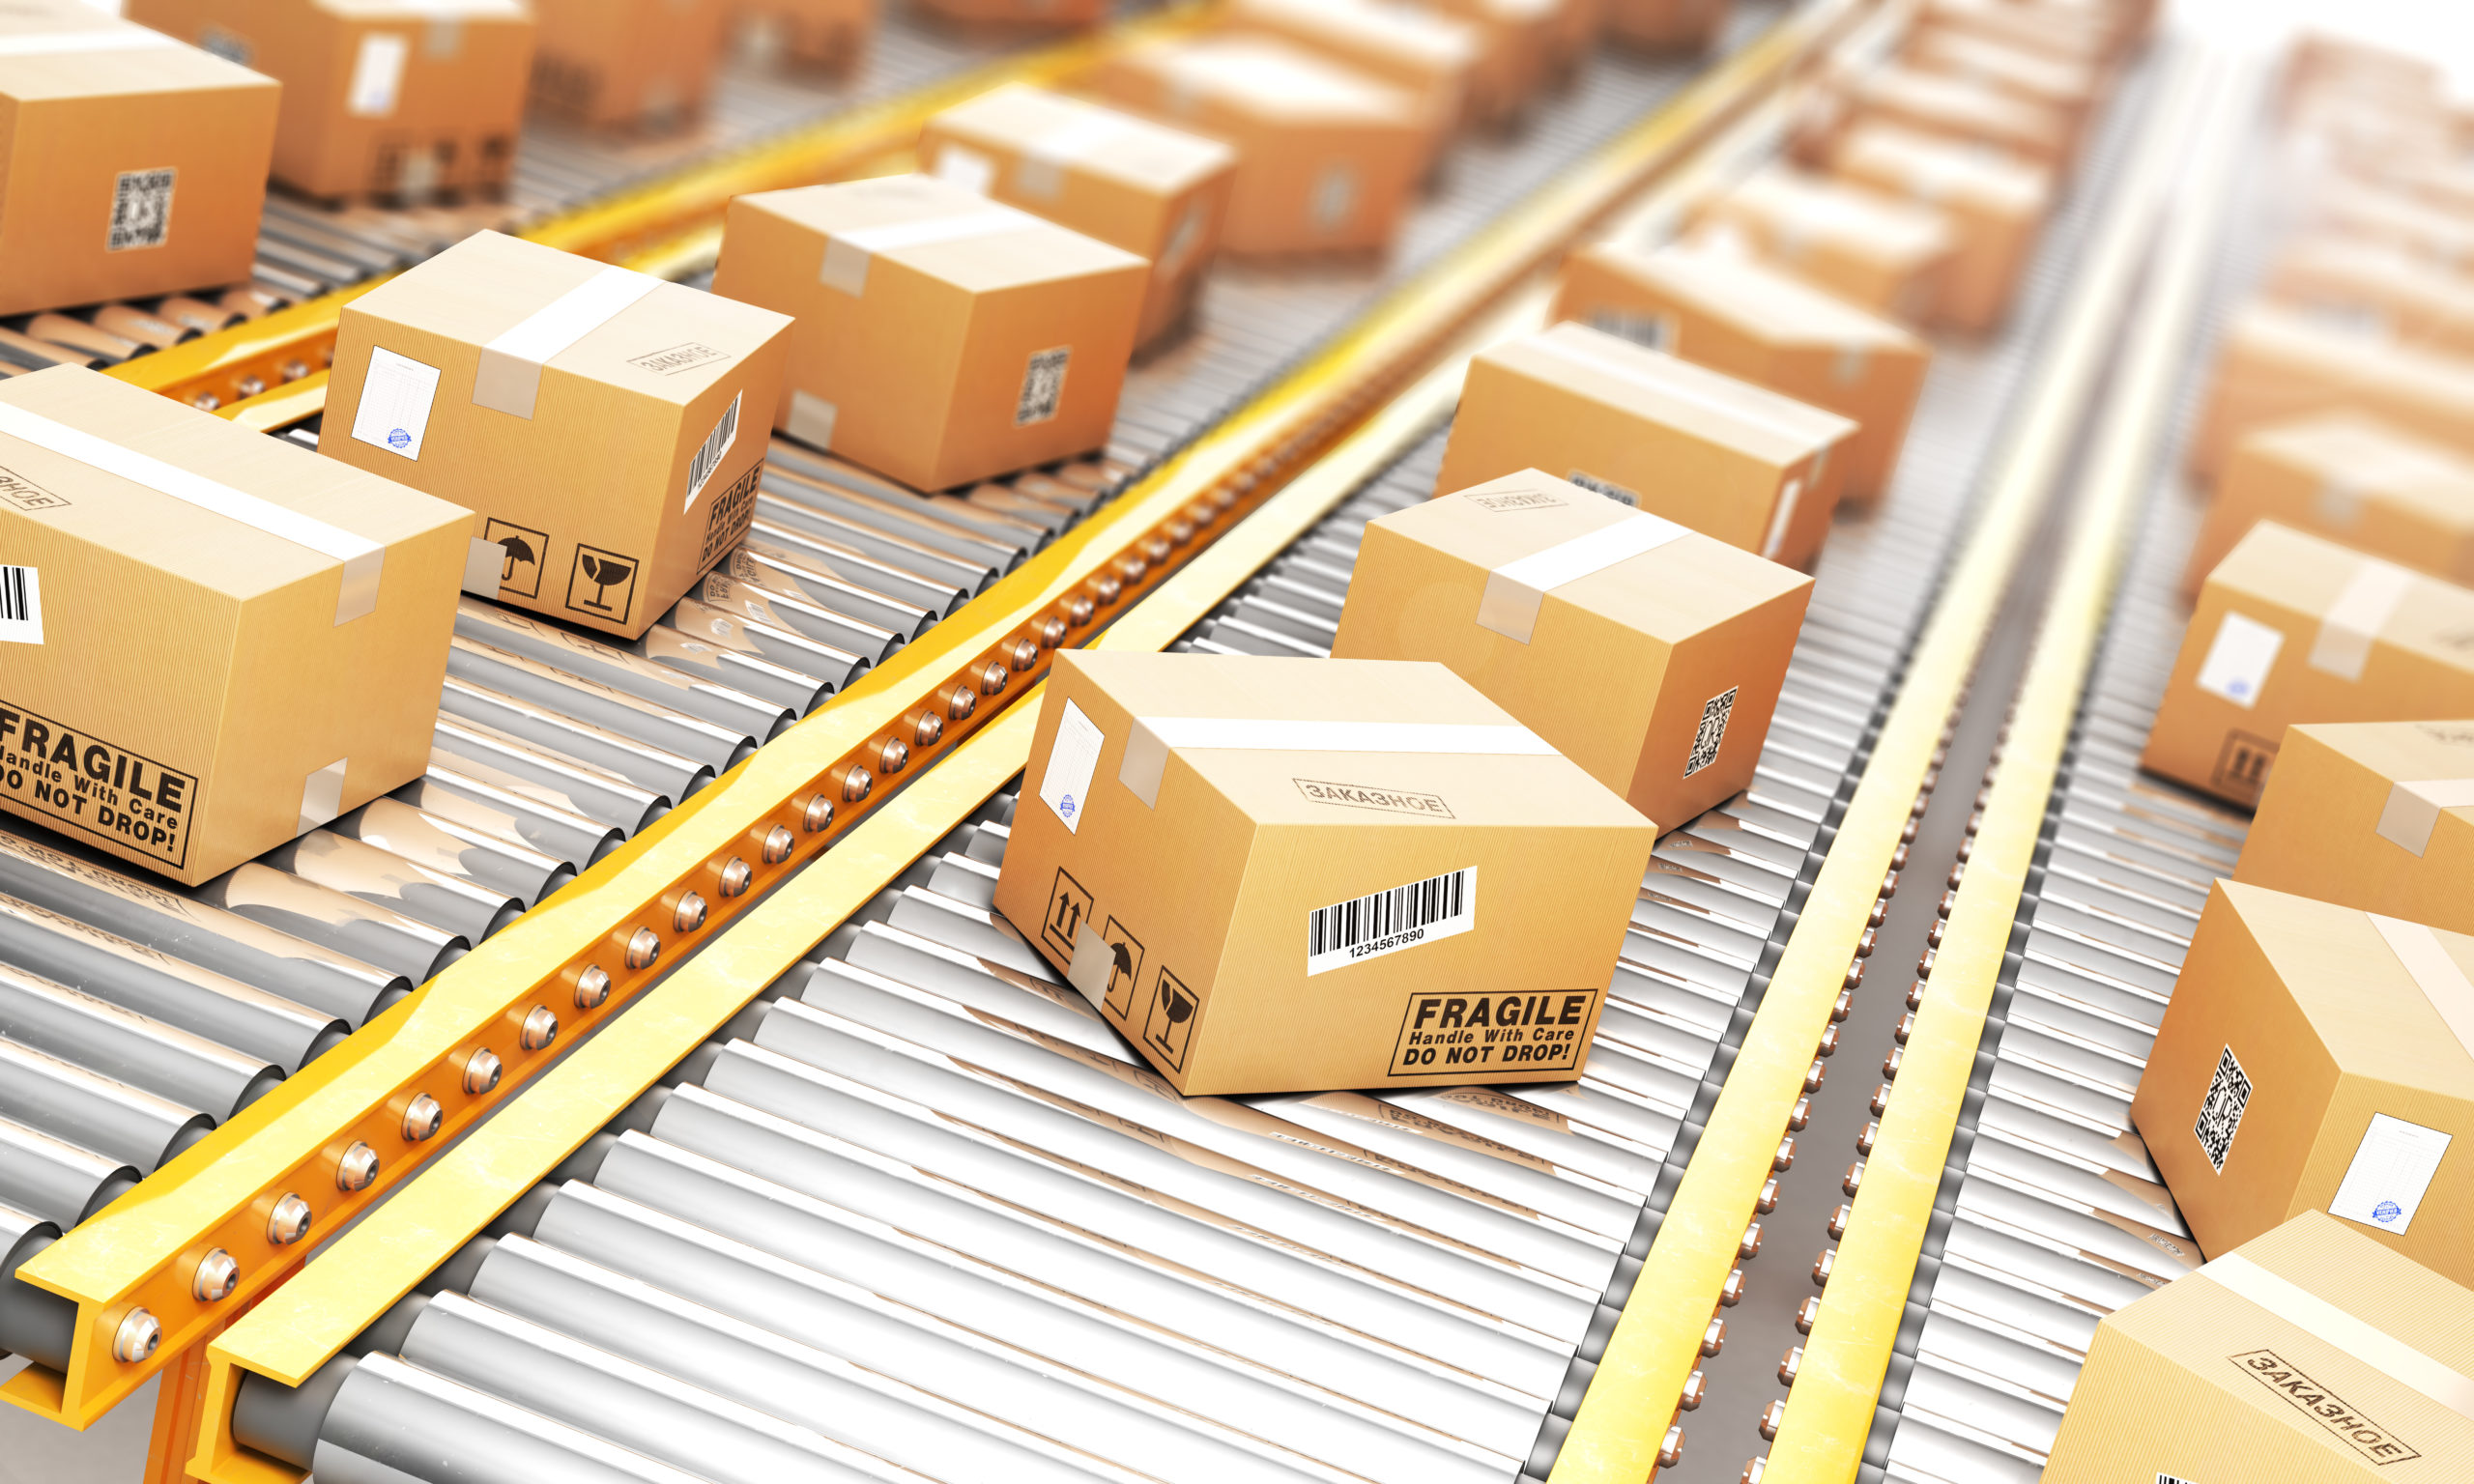 Packages sitting on a conveyor belt